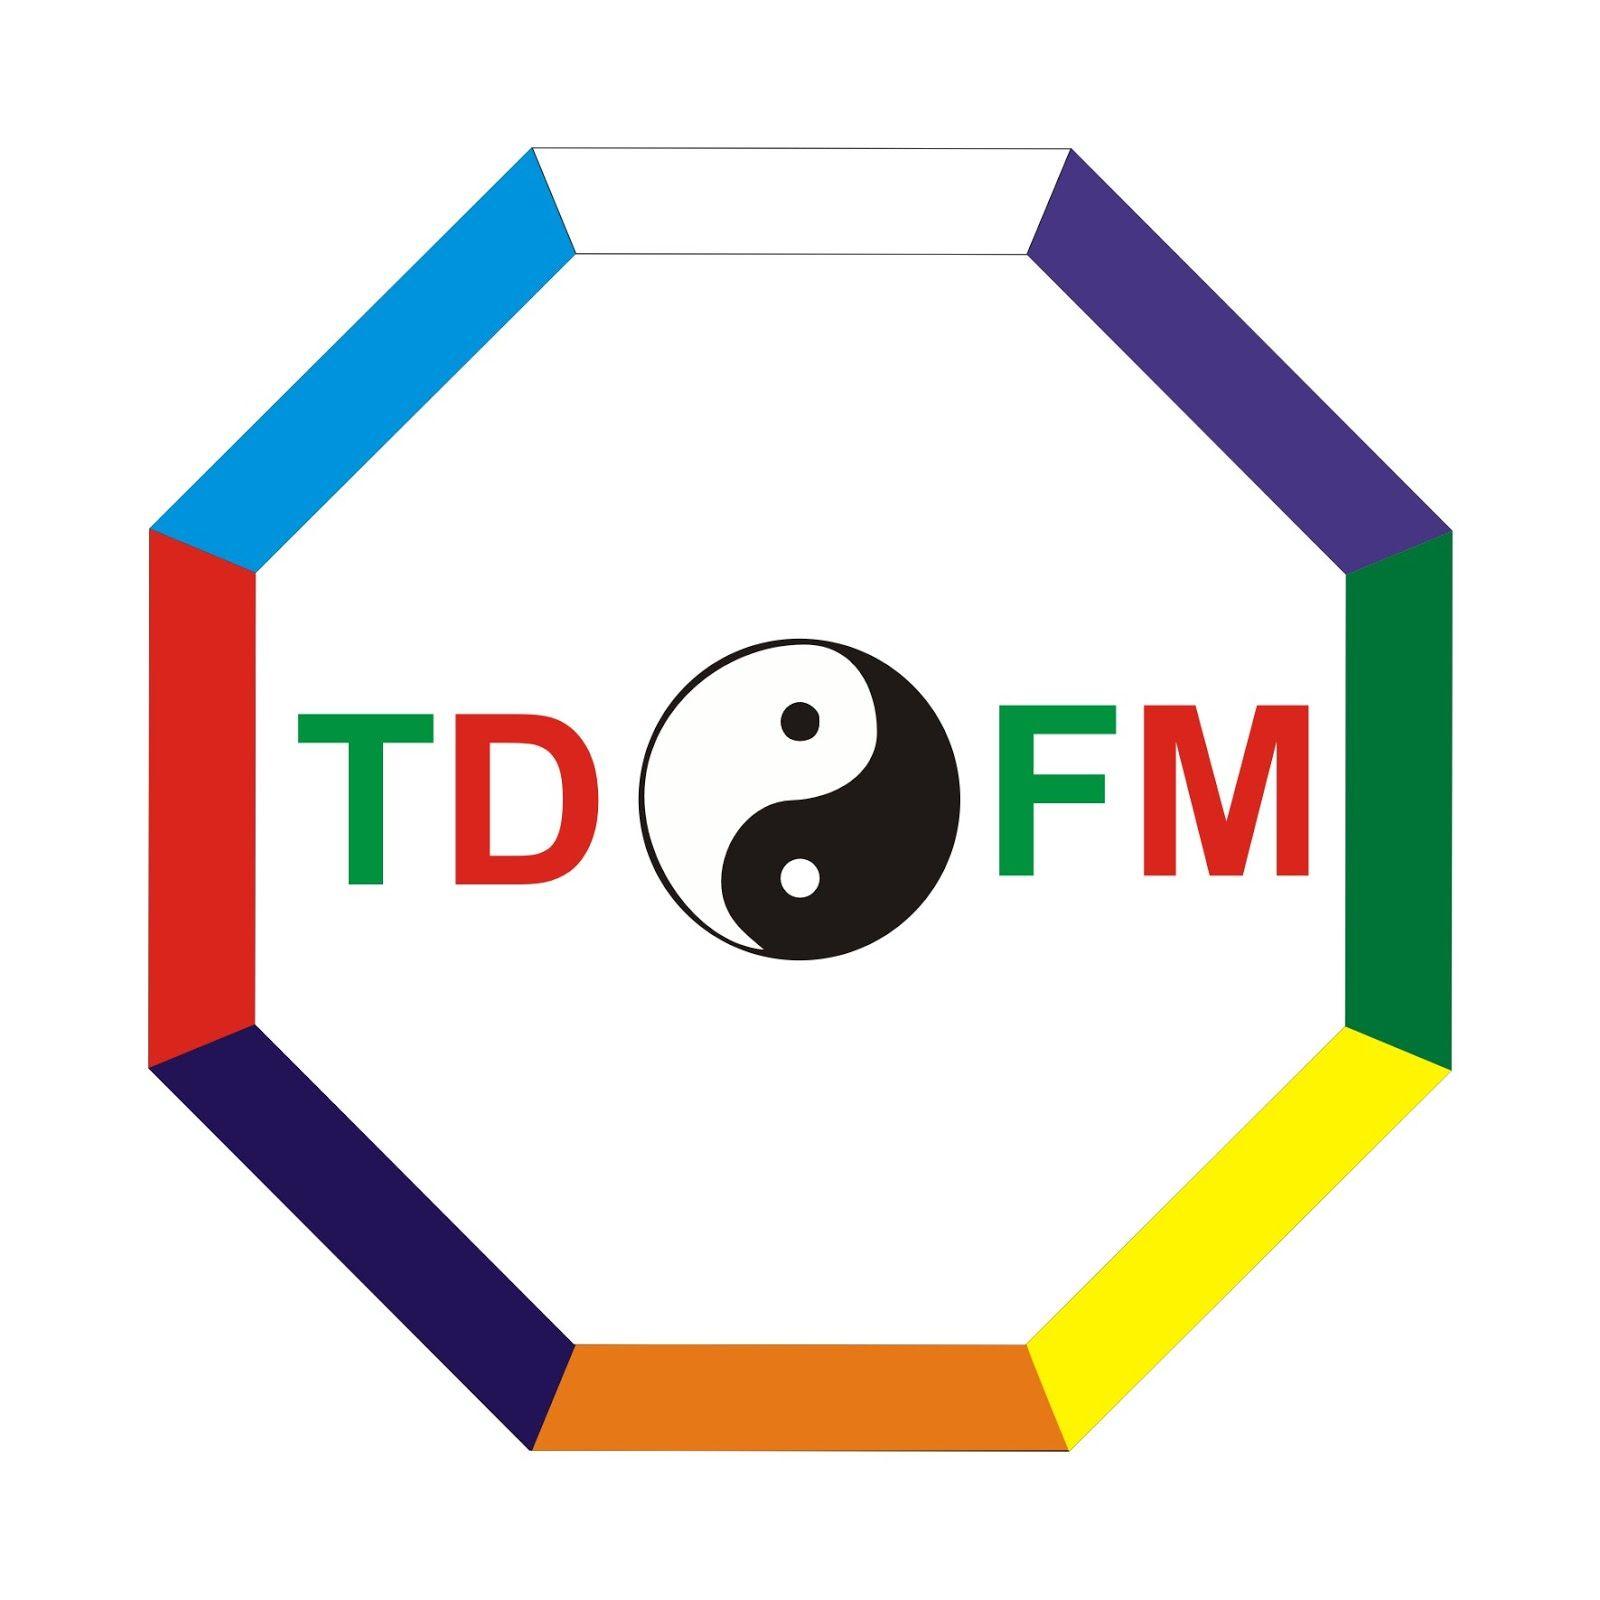 DFM Logo - Significance of Logo of 'Tao of DFM ' & Practice Training on DFM as